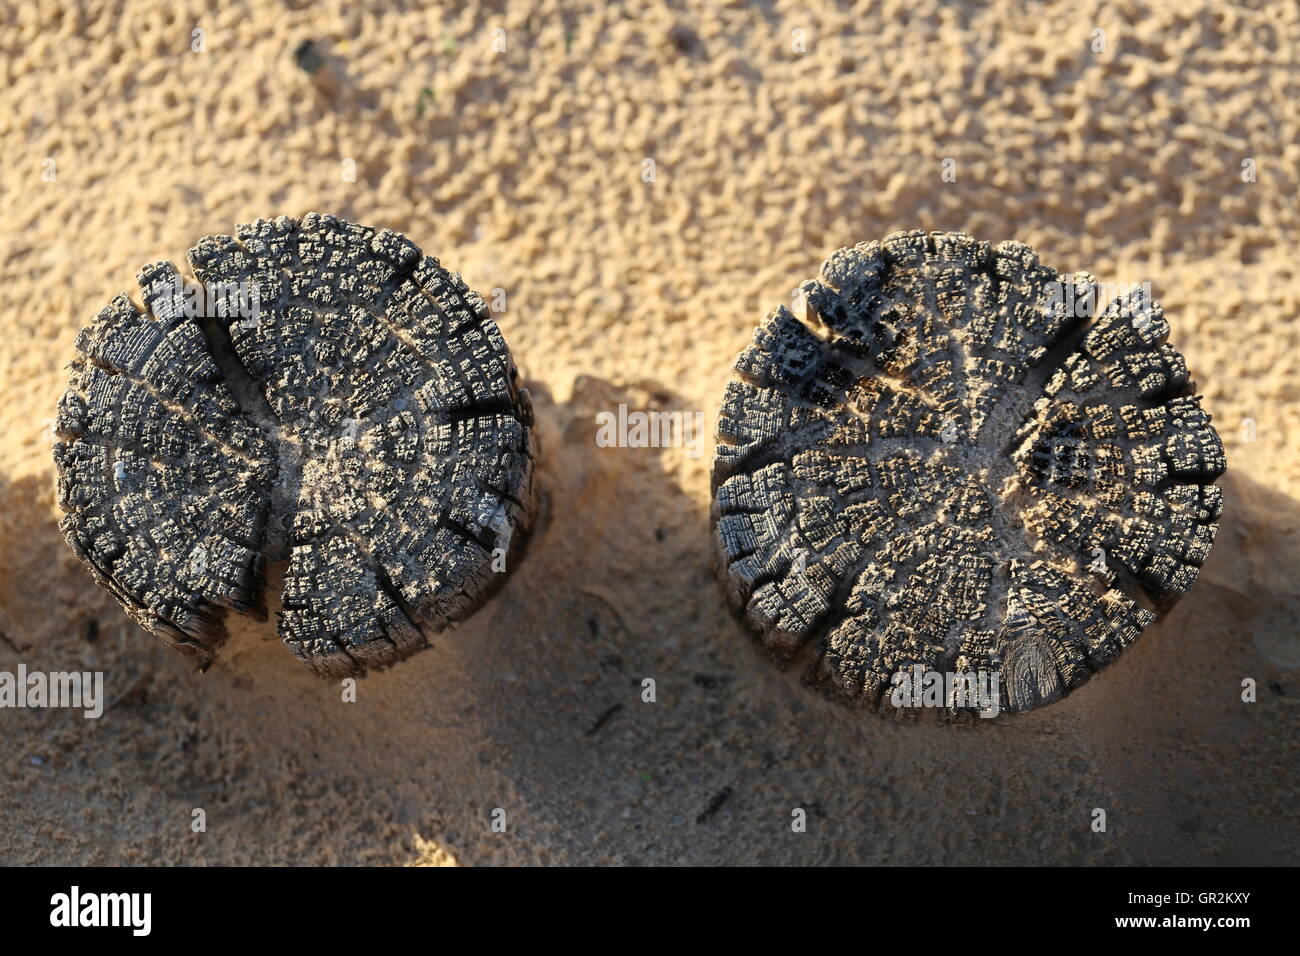 Wooden Posts on the Beach. Two wooden posts in a sandy coast, top view. Stock Photo